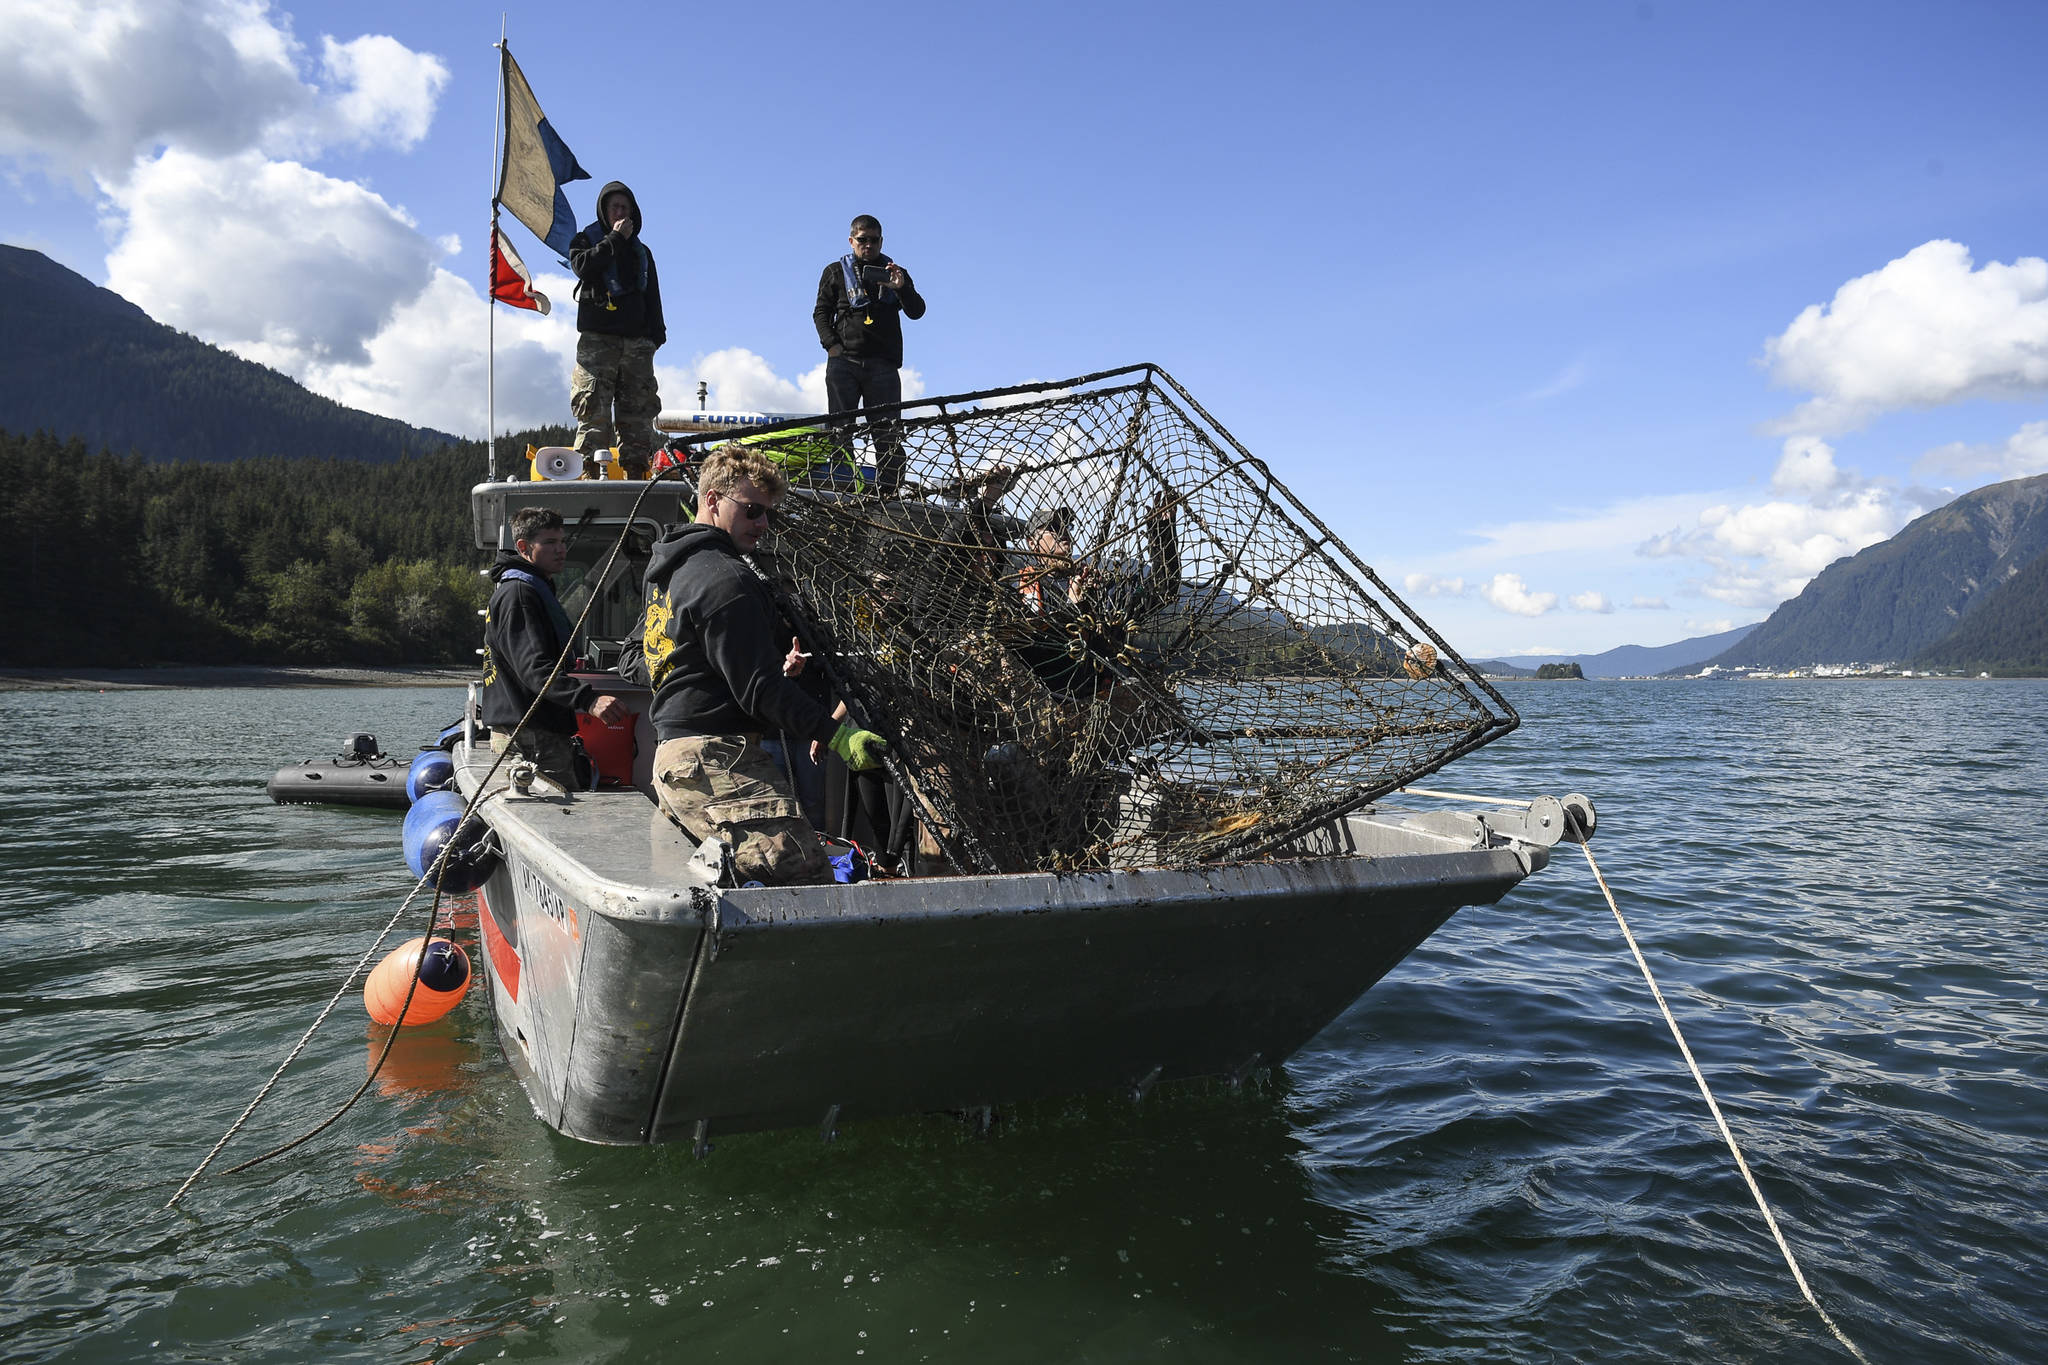 Members of the Army’s 74th Engineer Dive Detachment work off a Juneau Harbormaster boat to pull up a lost commercial crab pot in Gastineau Channel for the Douglas Indian Association/NOAA Marine Debris Project on Thursday, Sept. 5, 2019. The project aims to identify and remove derelict crab pots and their continued negative impact on wildlife and the environment. (Michael Penn | Juneau Empire)